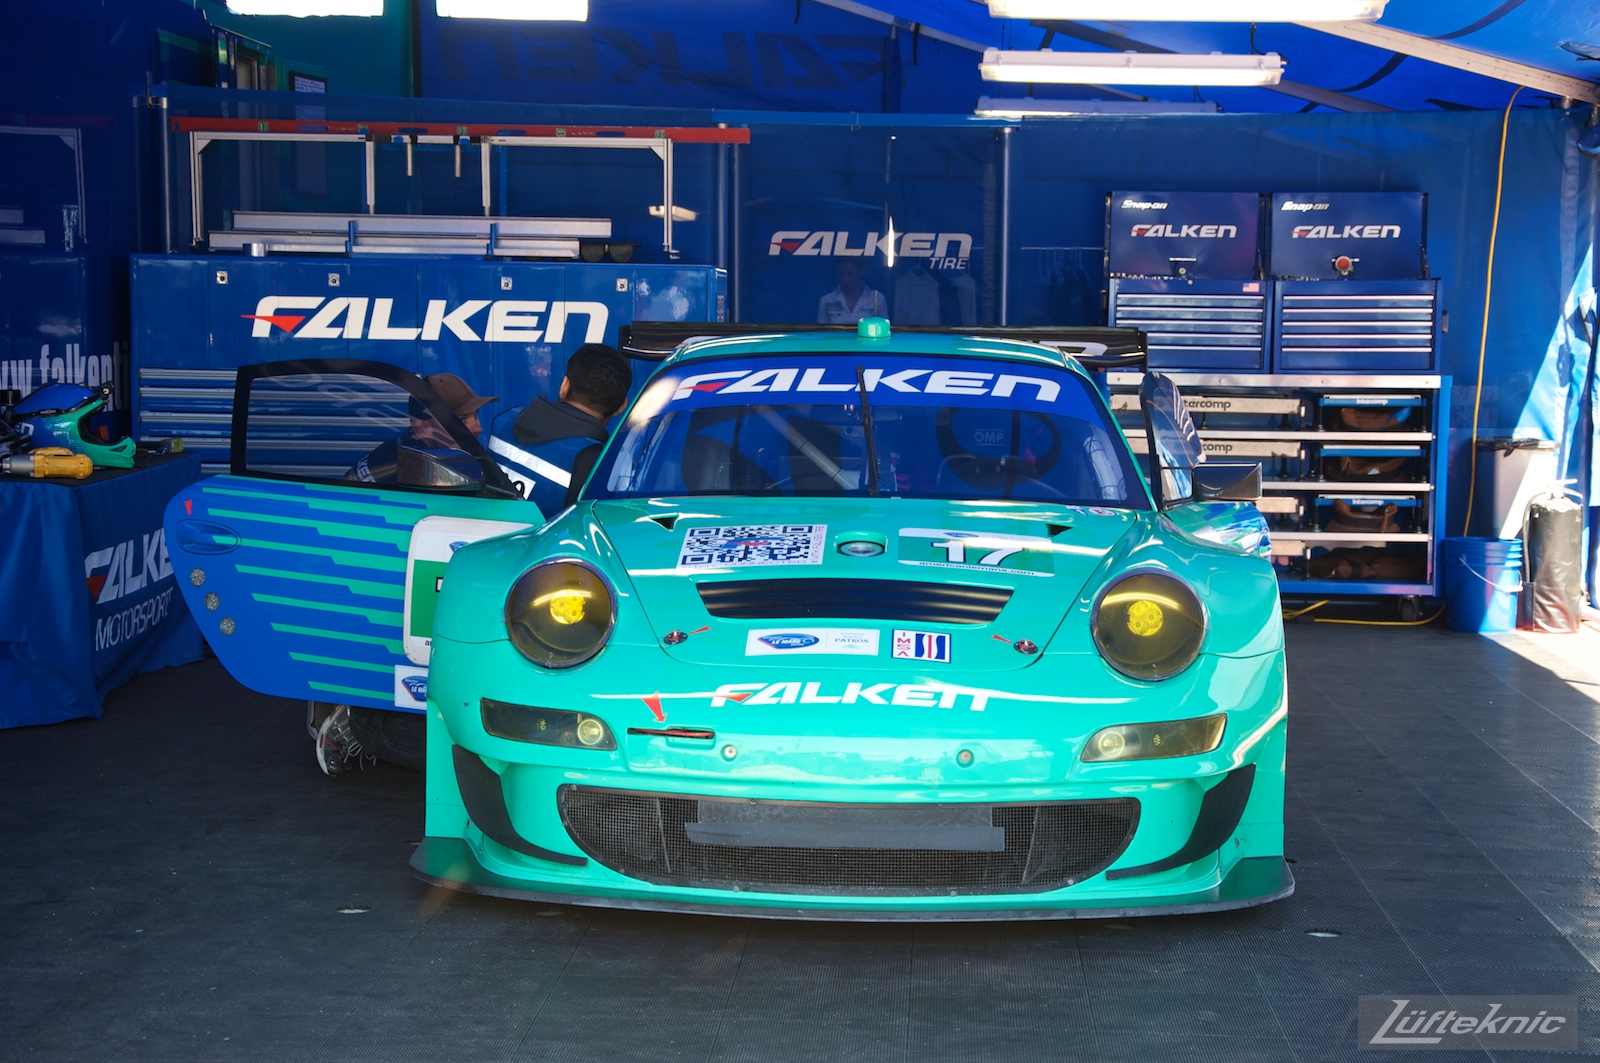 The iconic teal and blue Falken Tire Porsche 911 RSR.